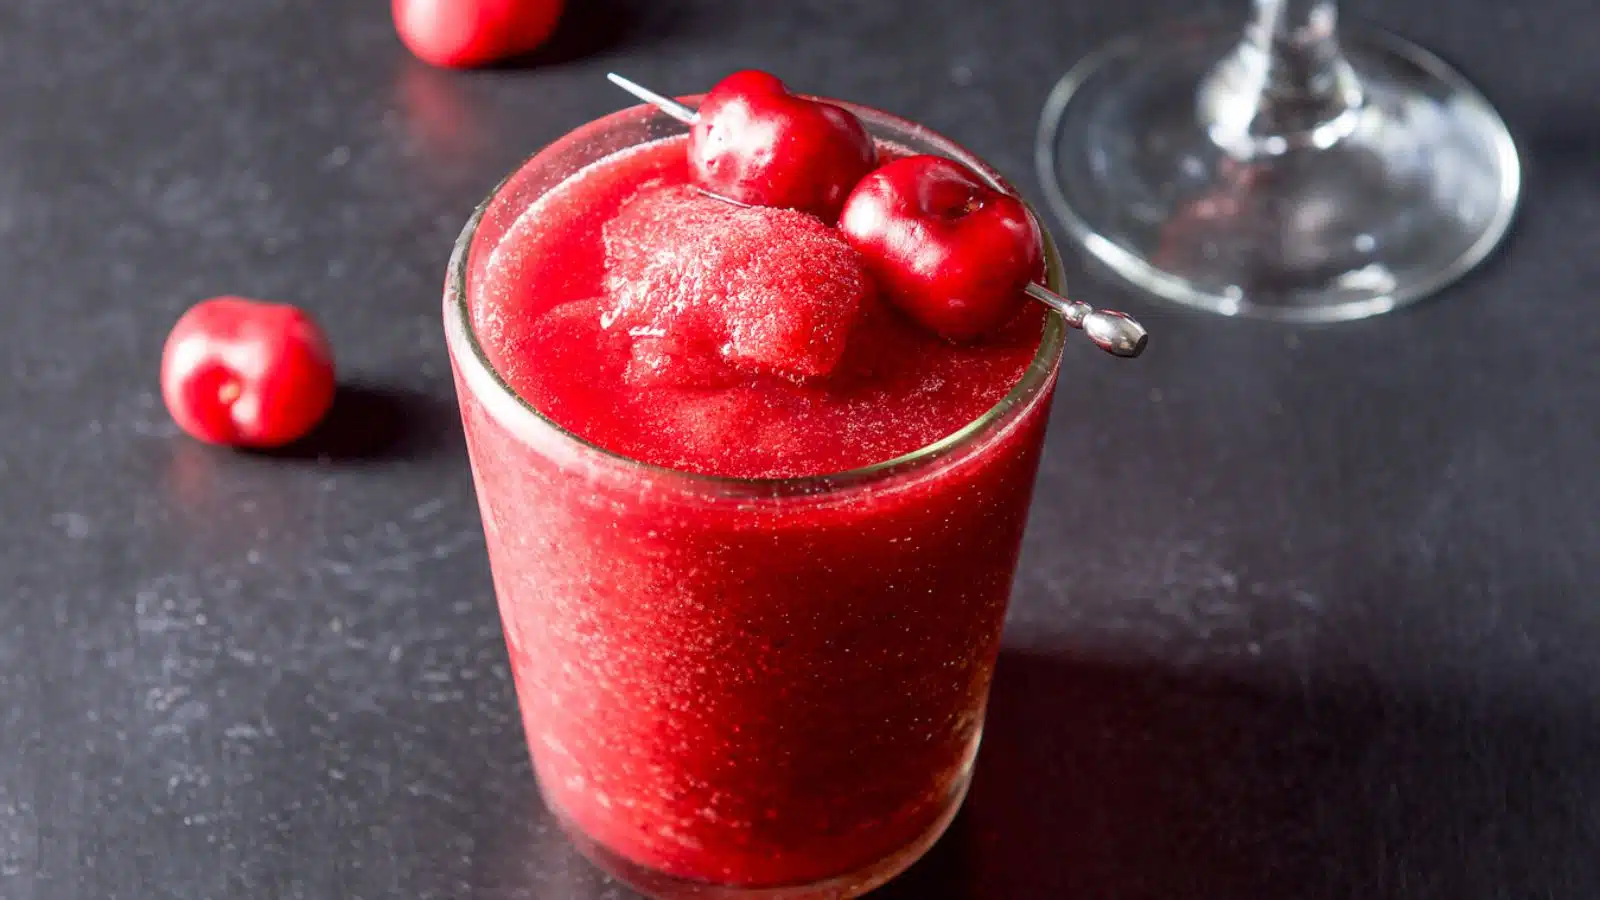 A double old fashioned glass filled with the frozen cherry margarita with cherries as garnish